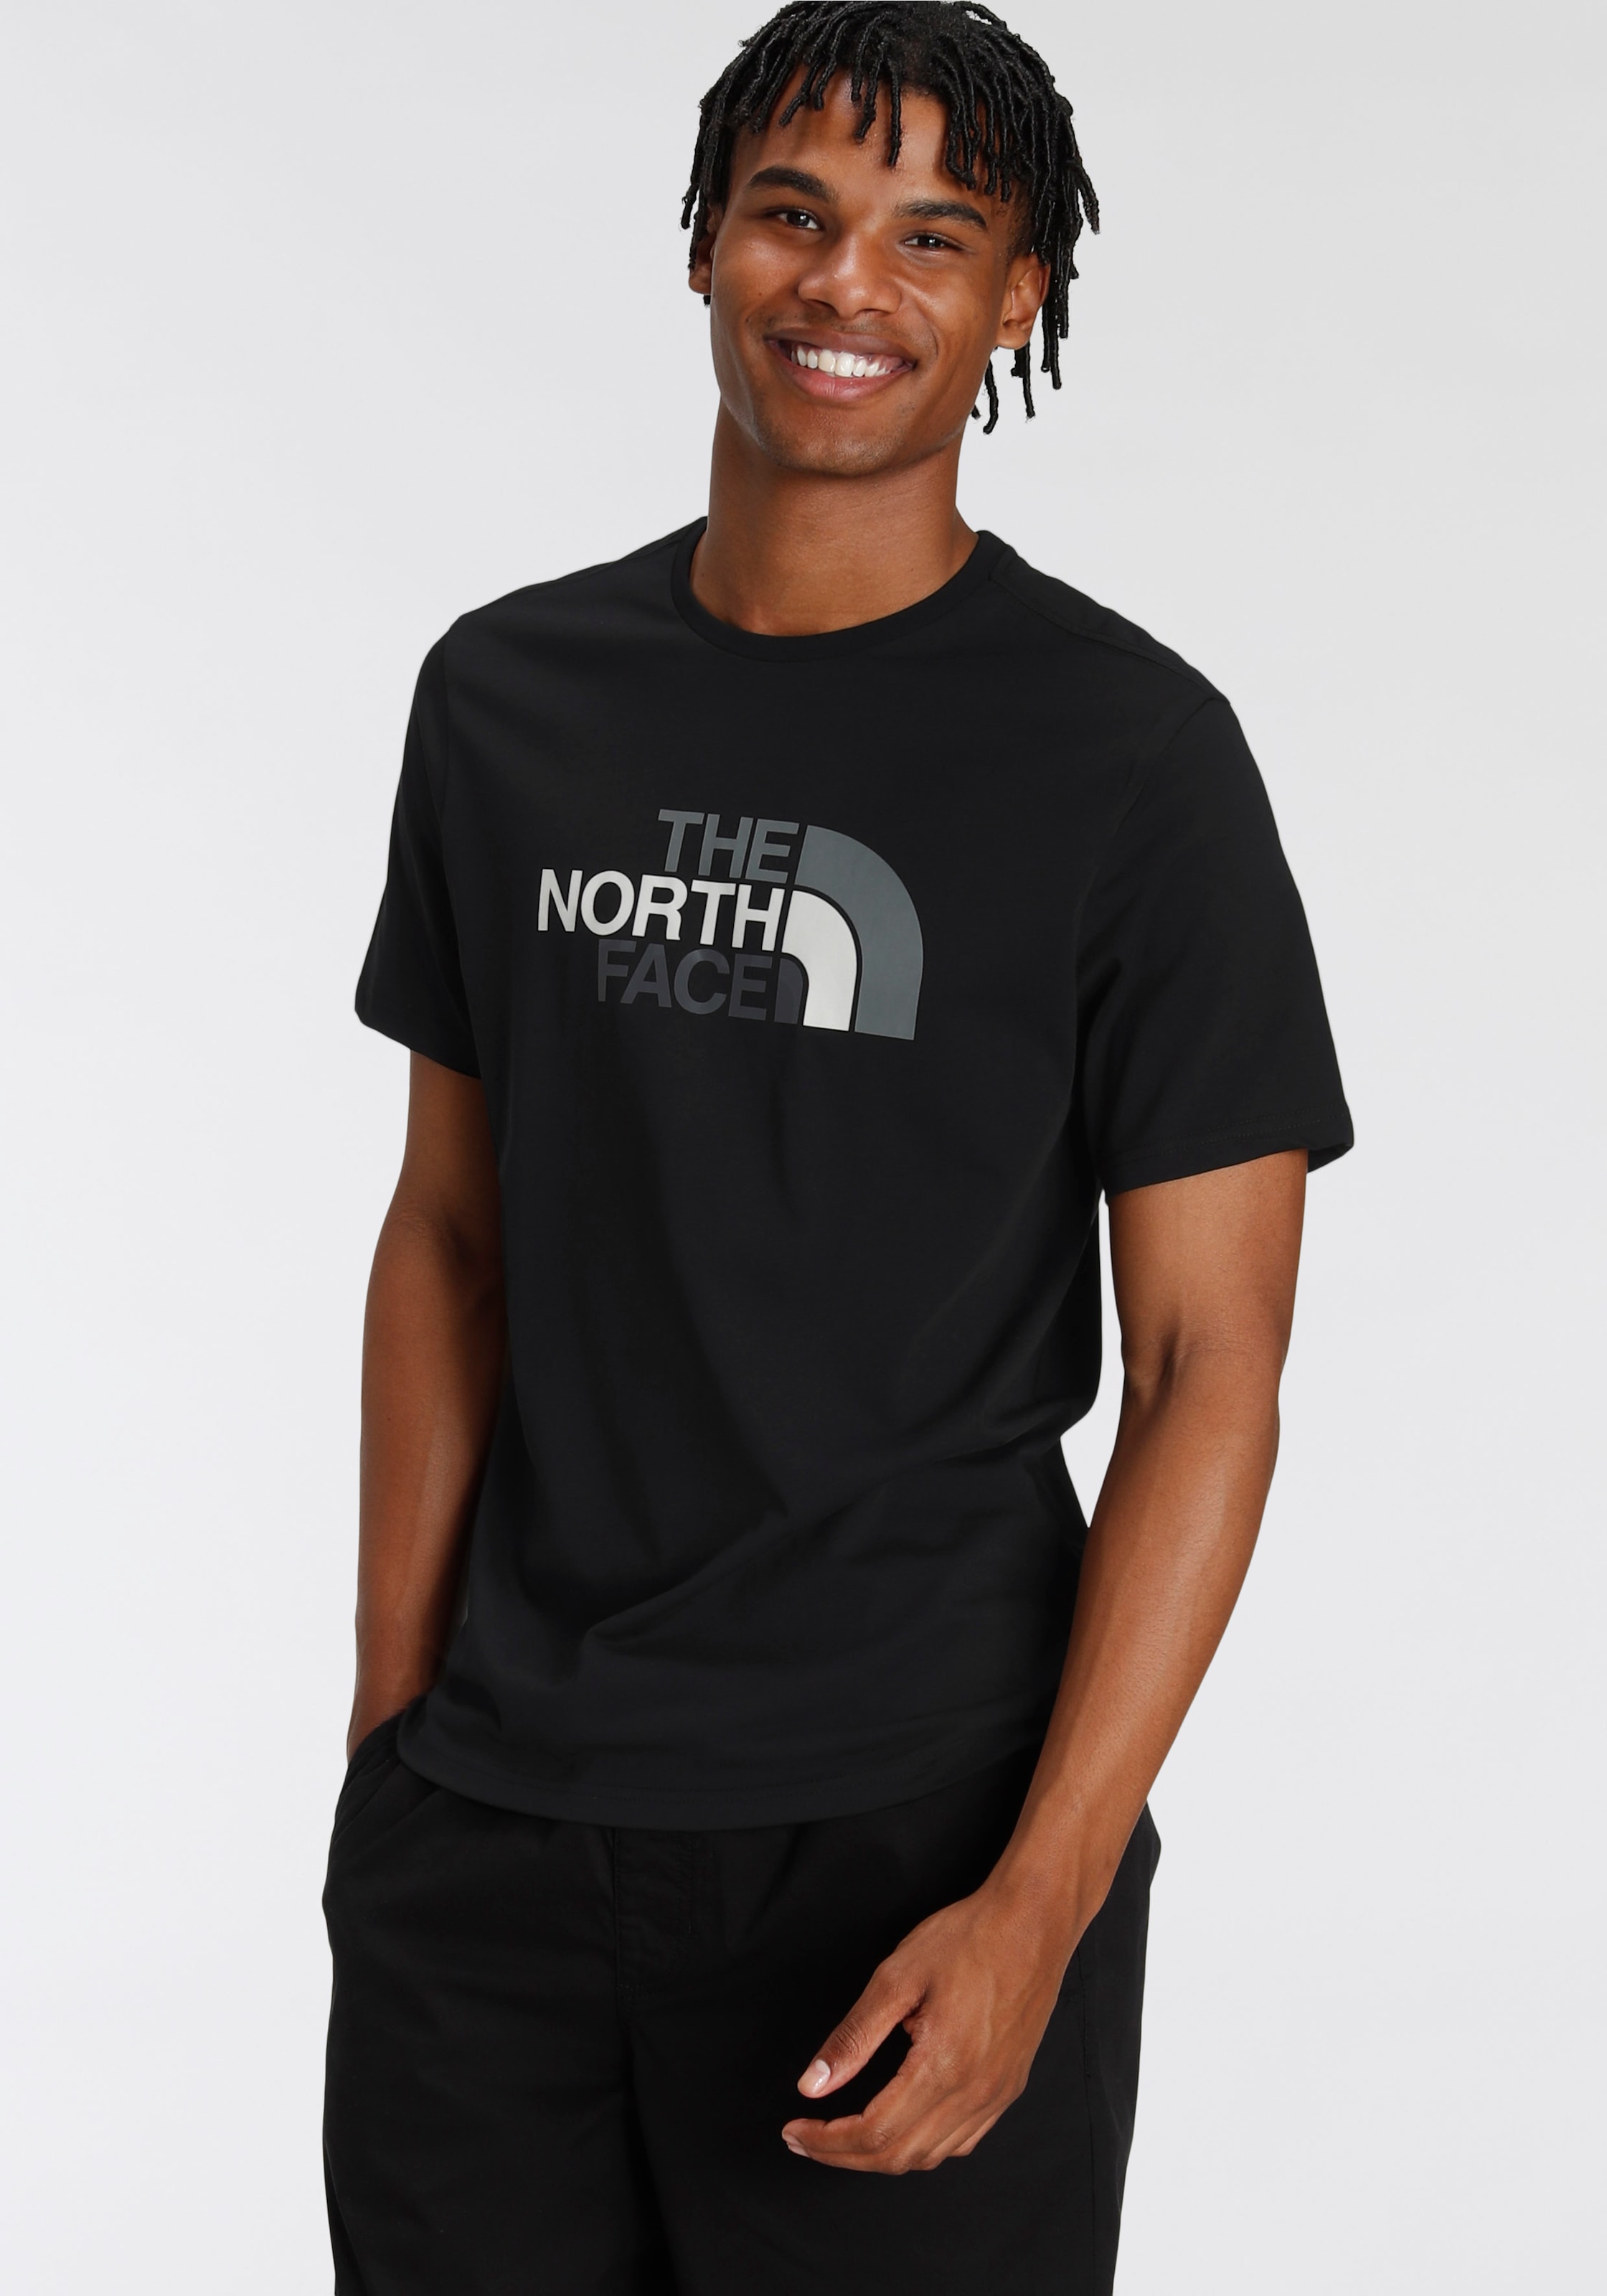 bei OTTO T-Shirt Logo-Print North Großer online Face TEE«, The kaufen »EASY